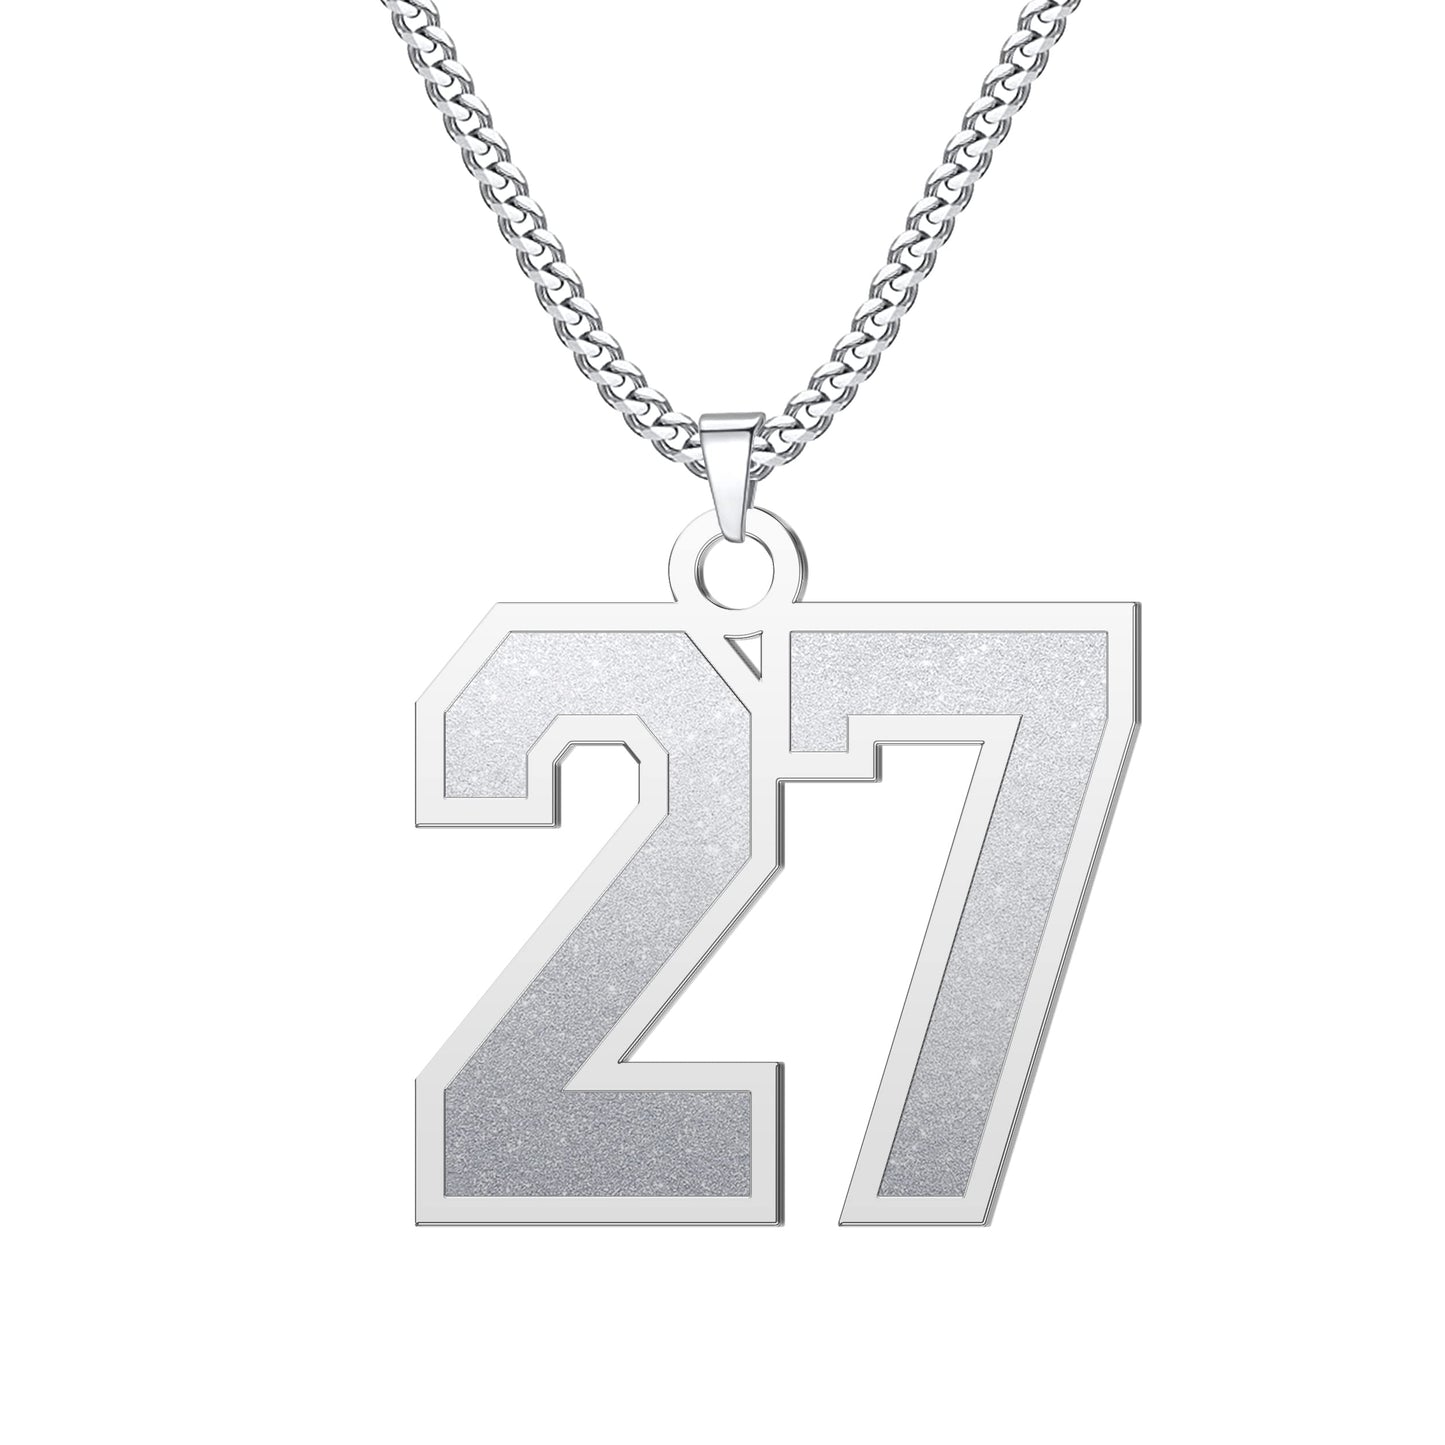 JSJOY Number Necklaces for Athletes 00-99 Jersey Number Chain Personalized Custom with Name Sports Soccer Football Basketball Baseball for Men Girls